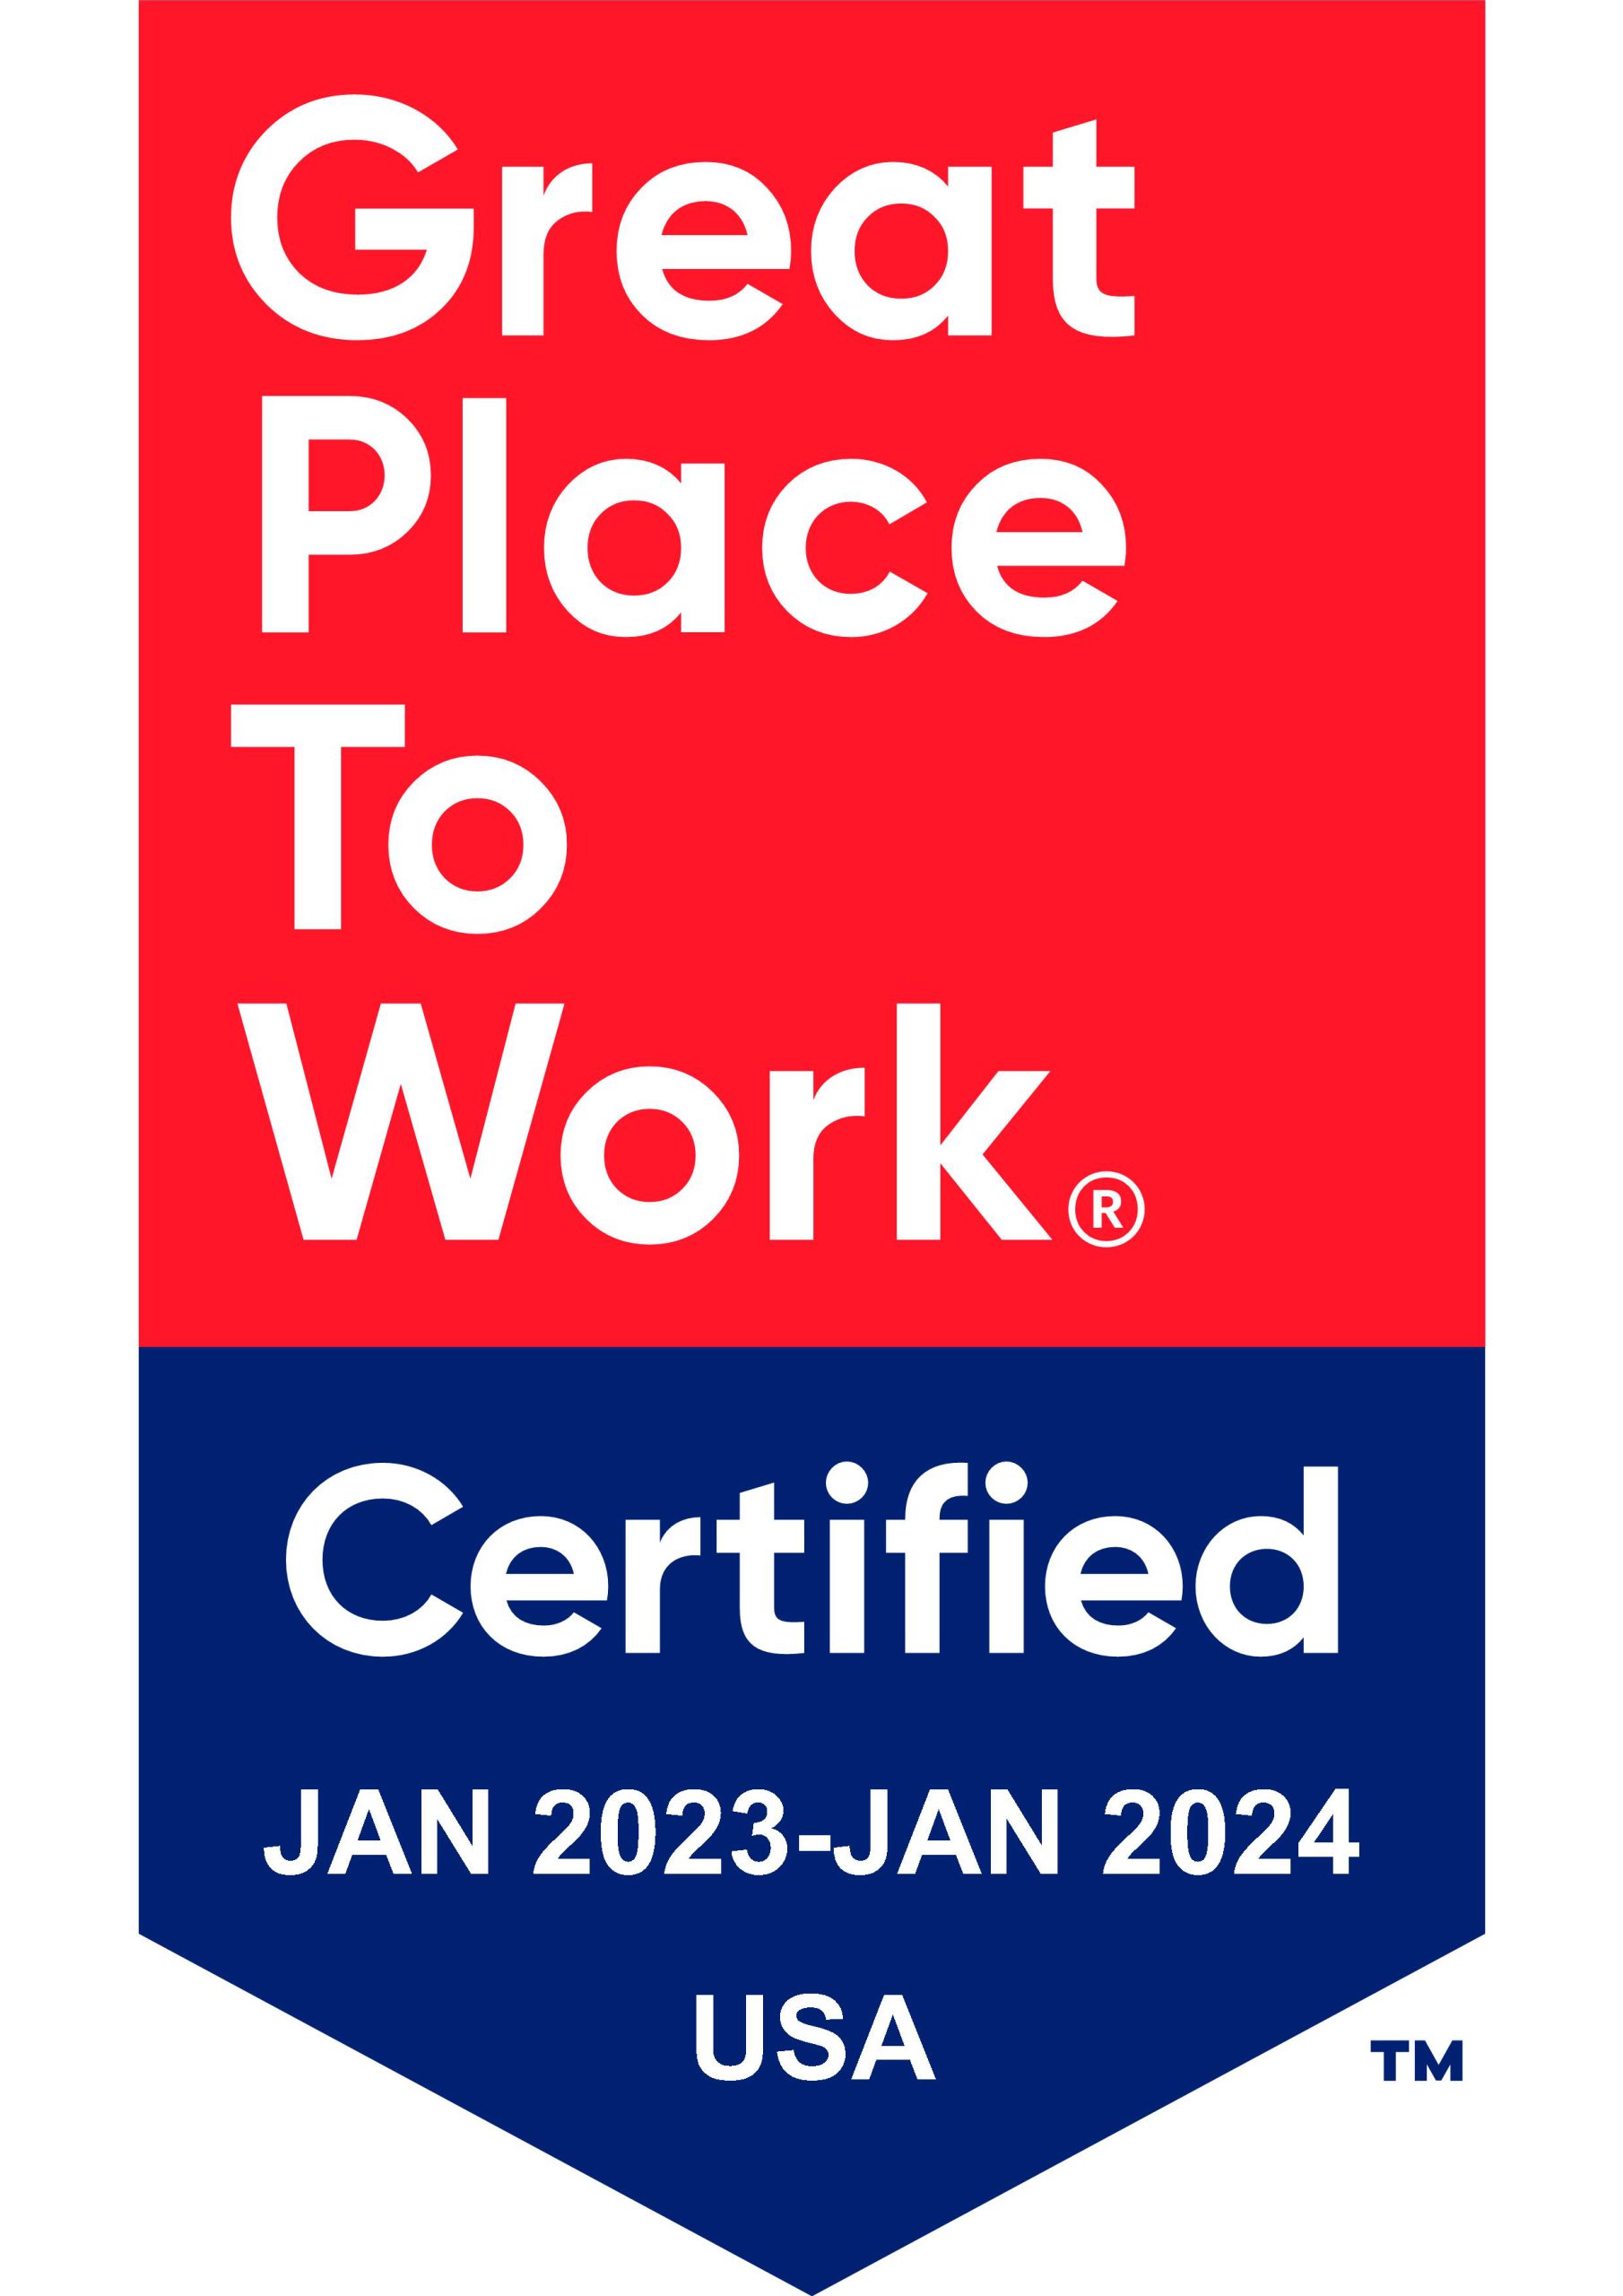 Best Place to Work Certified 2023-2024